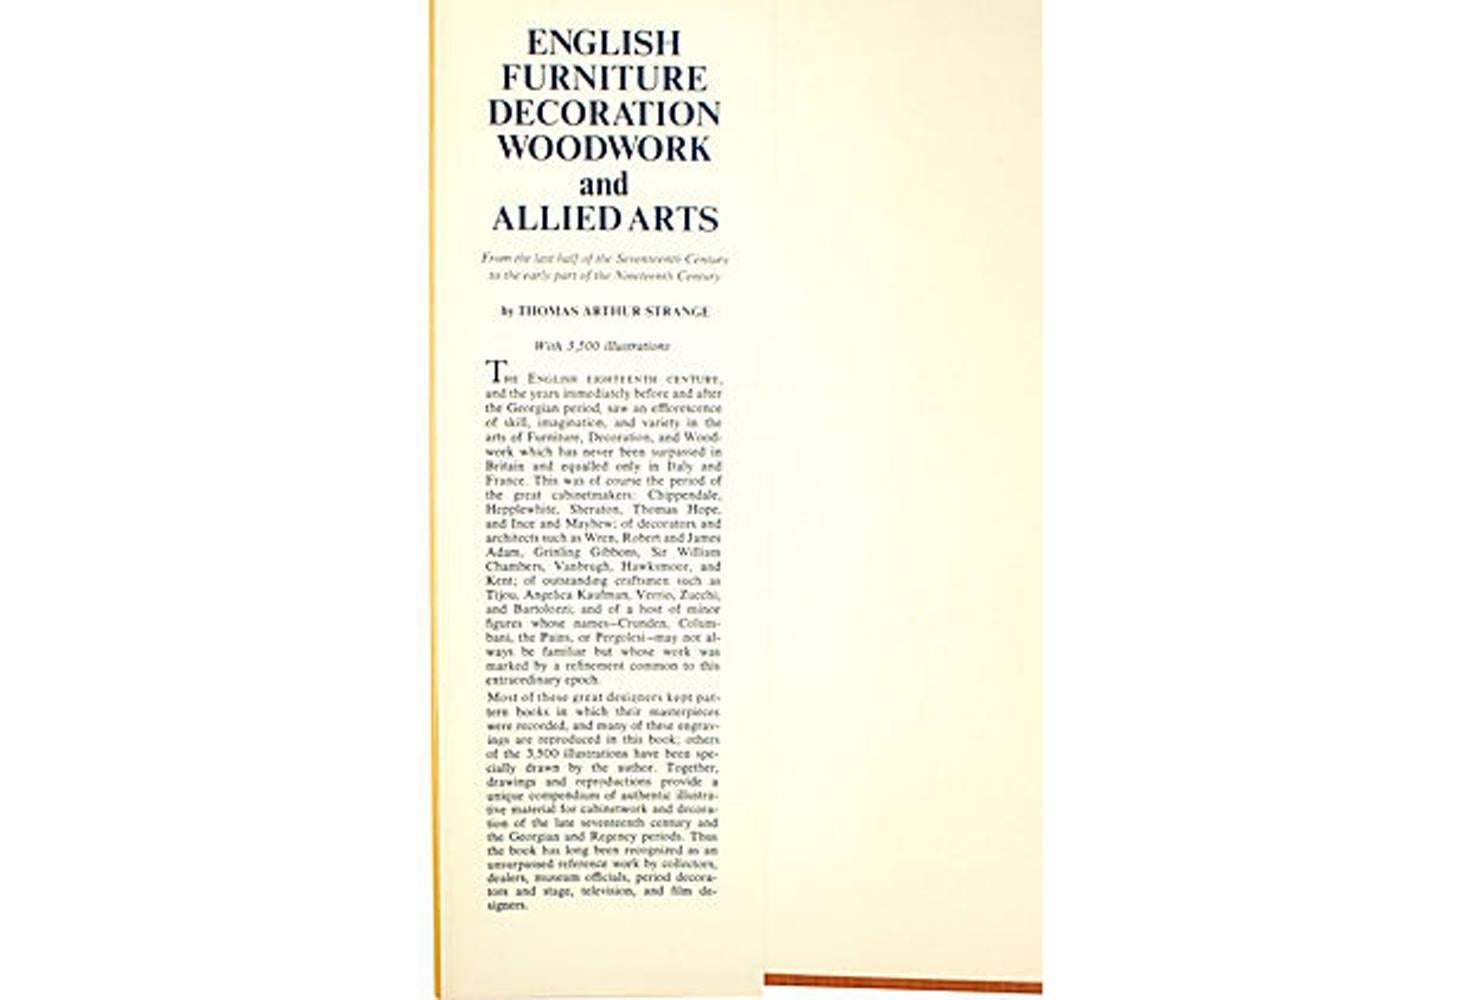 English Furniture Decoration and Allied Arts from the last half of the 17th century to the early part of the 19th century by Thomas Strange. NY: Bonanza Books, 1950. 1st Ed thus reprint of his famous late 19th-century book with dust jacket. 368 pp.